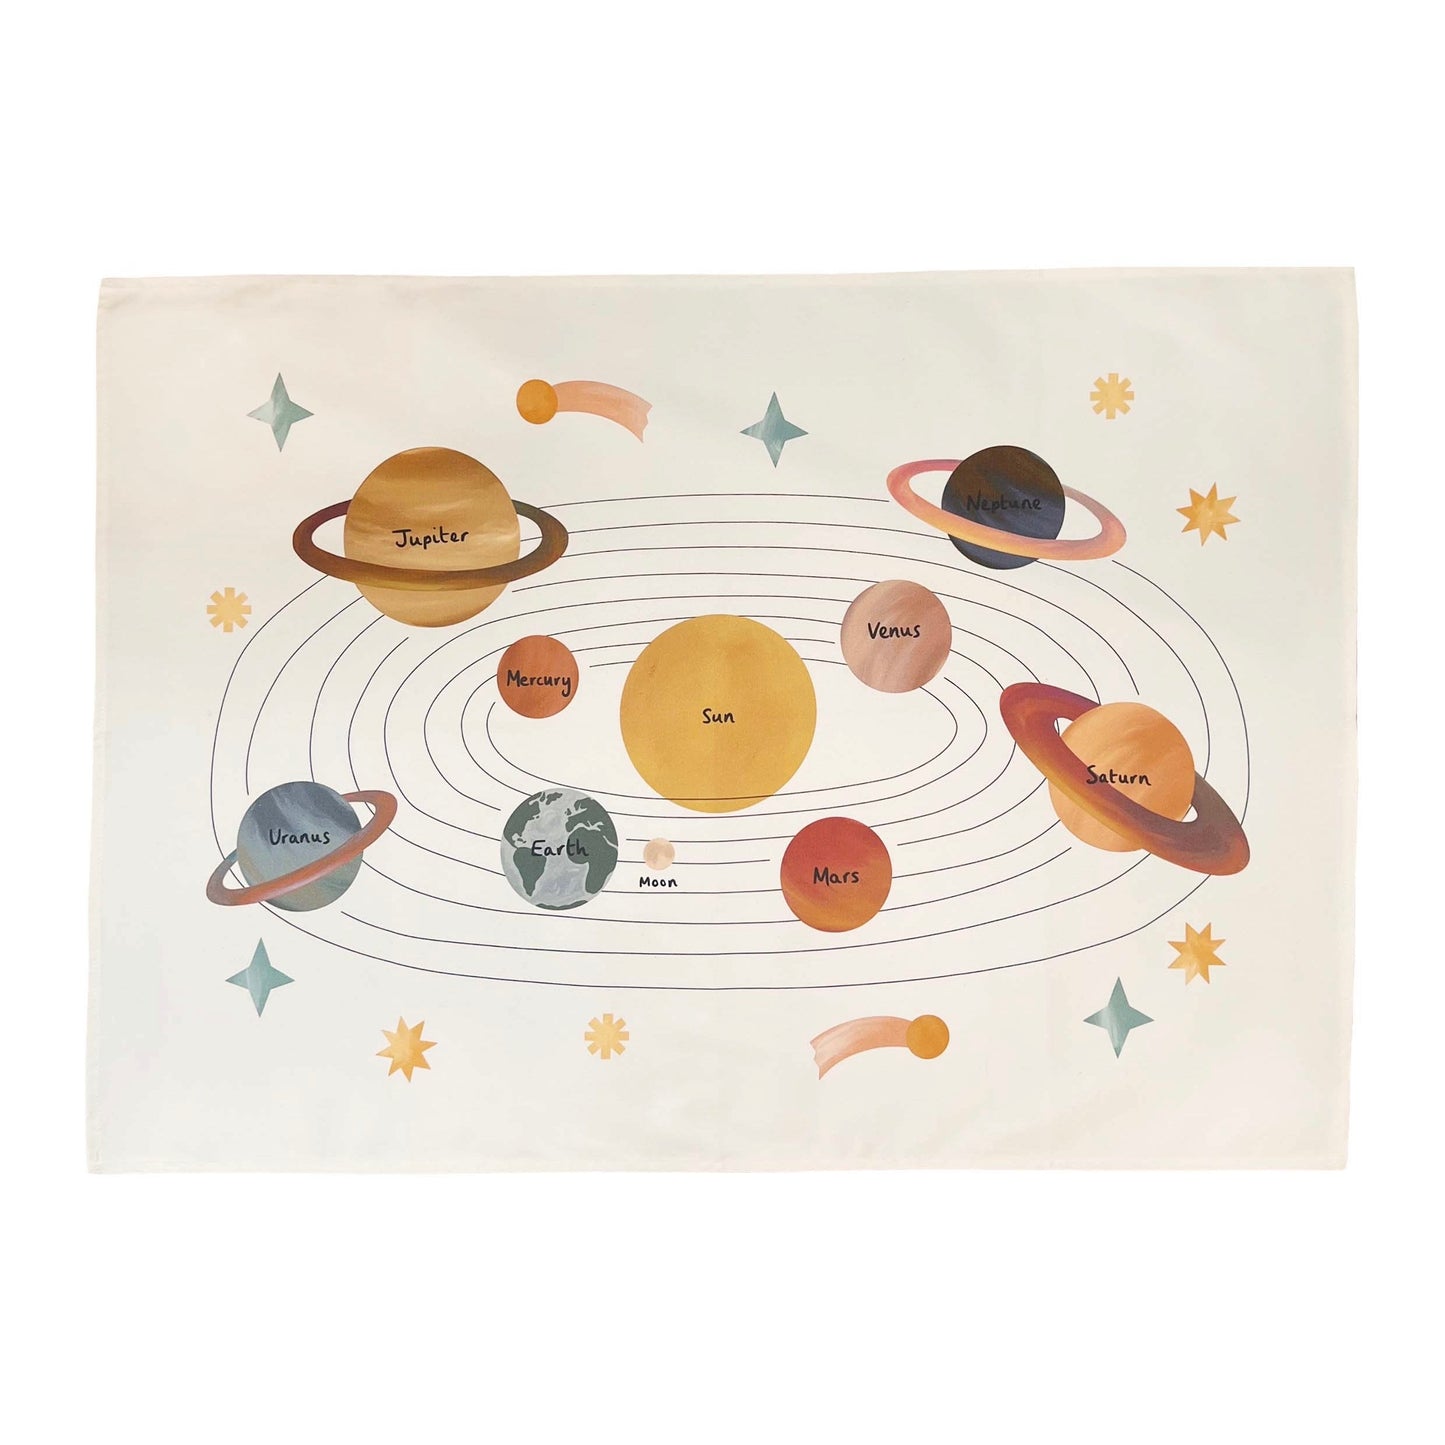 IMPERFECT SALE - Solar System Wall Hanging (Large)